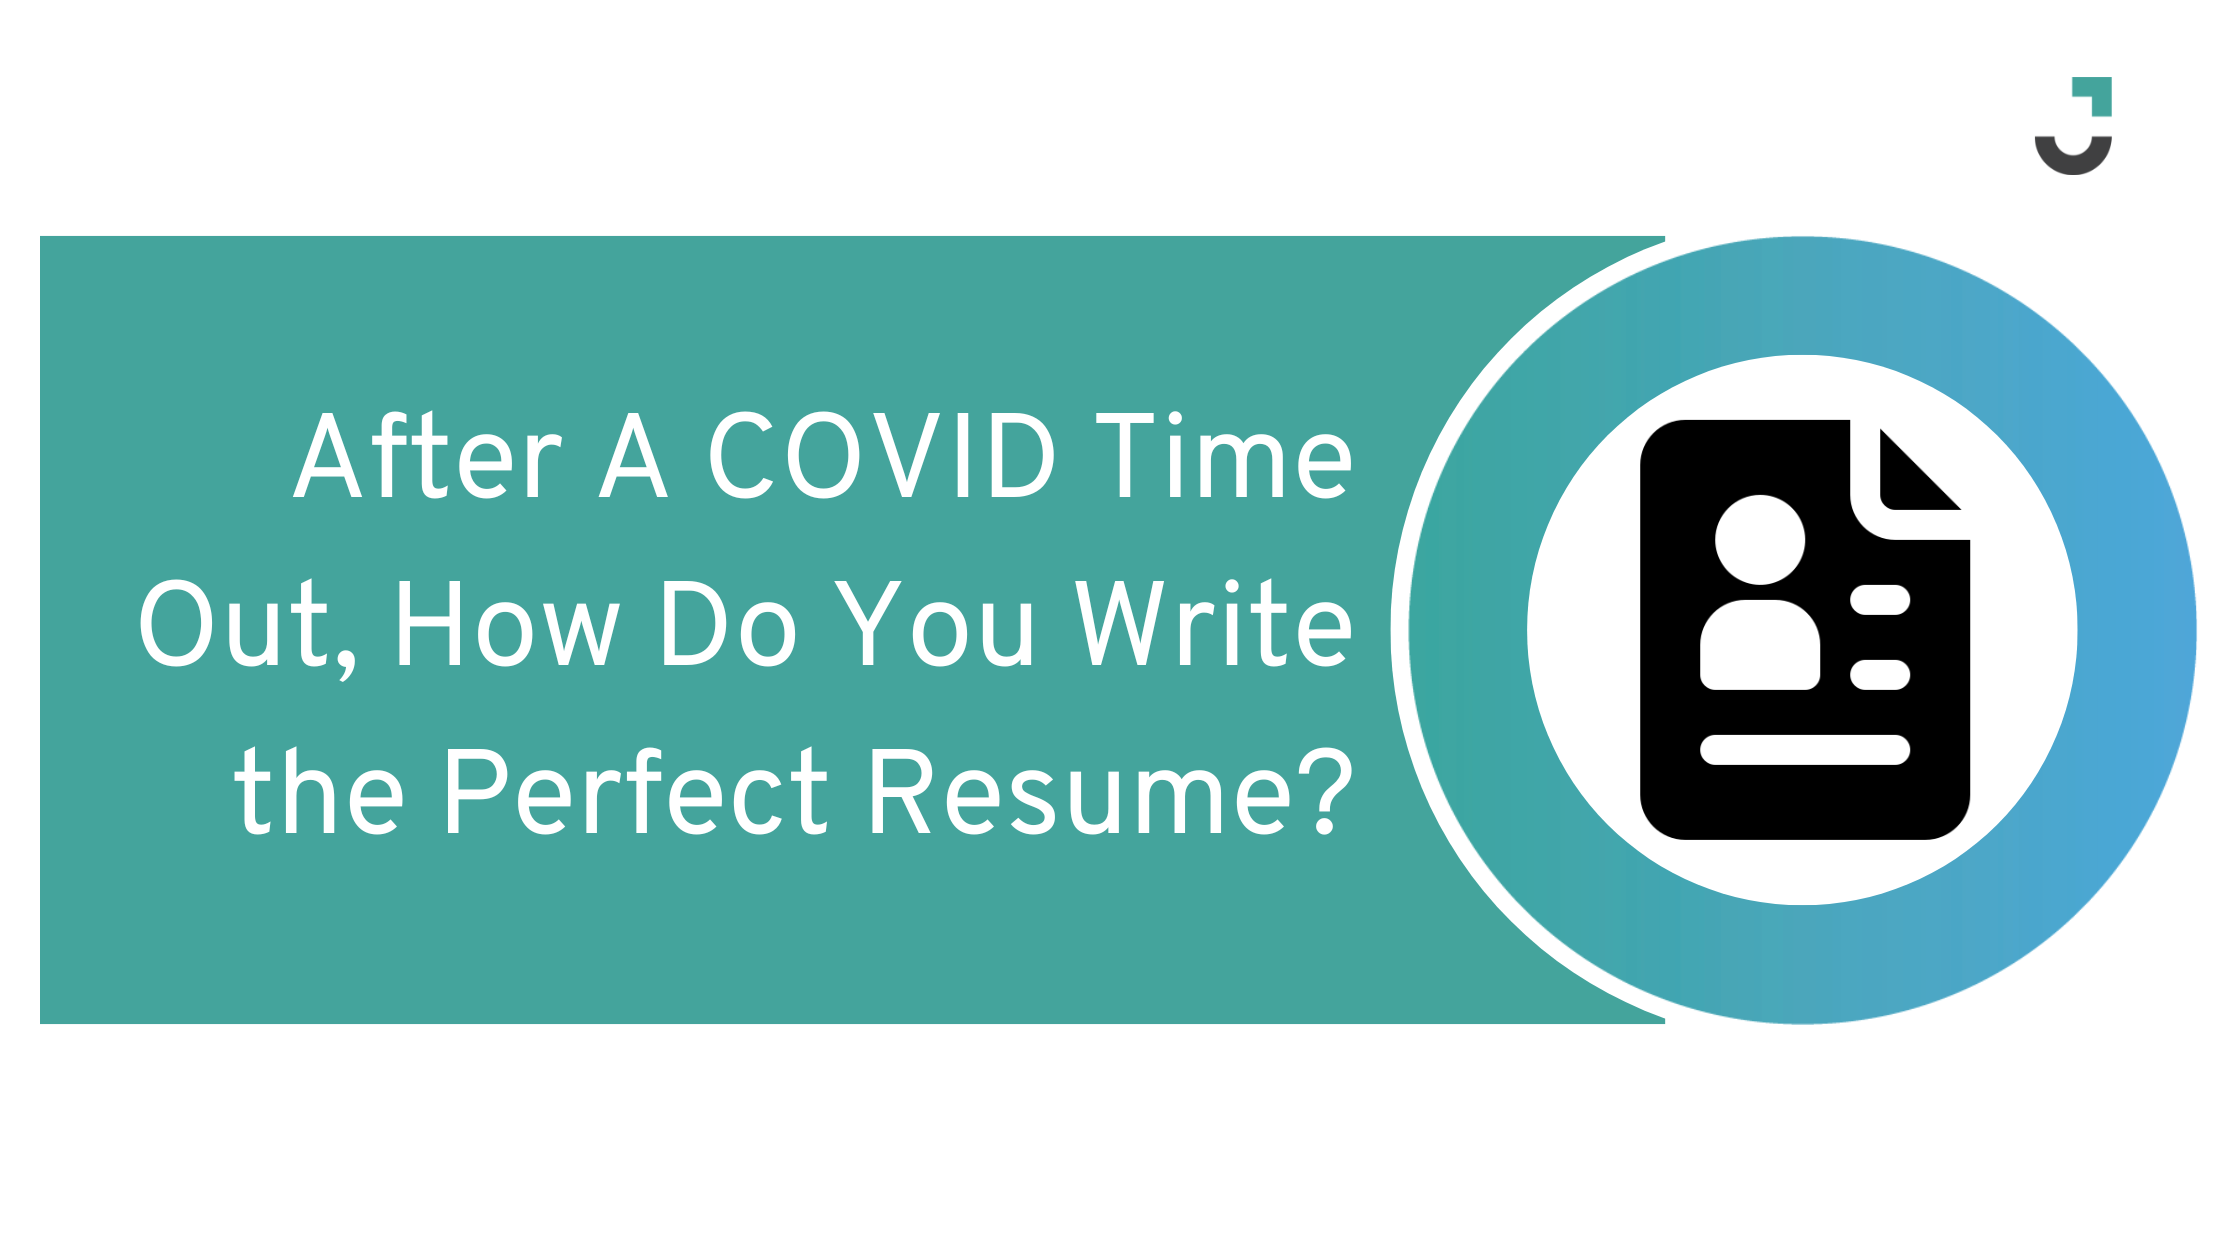 After A COVID Time Out, How Do You Write the Perfect Resume?